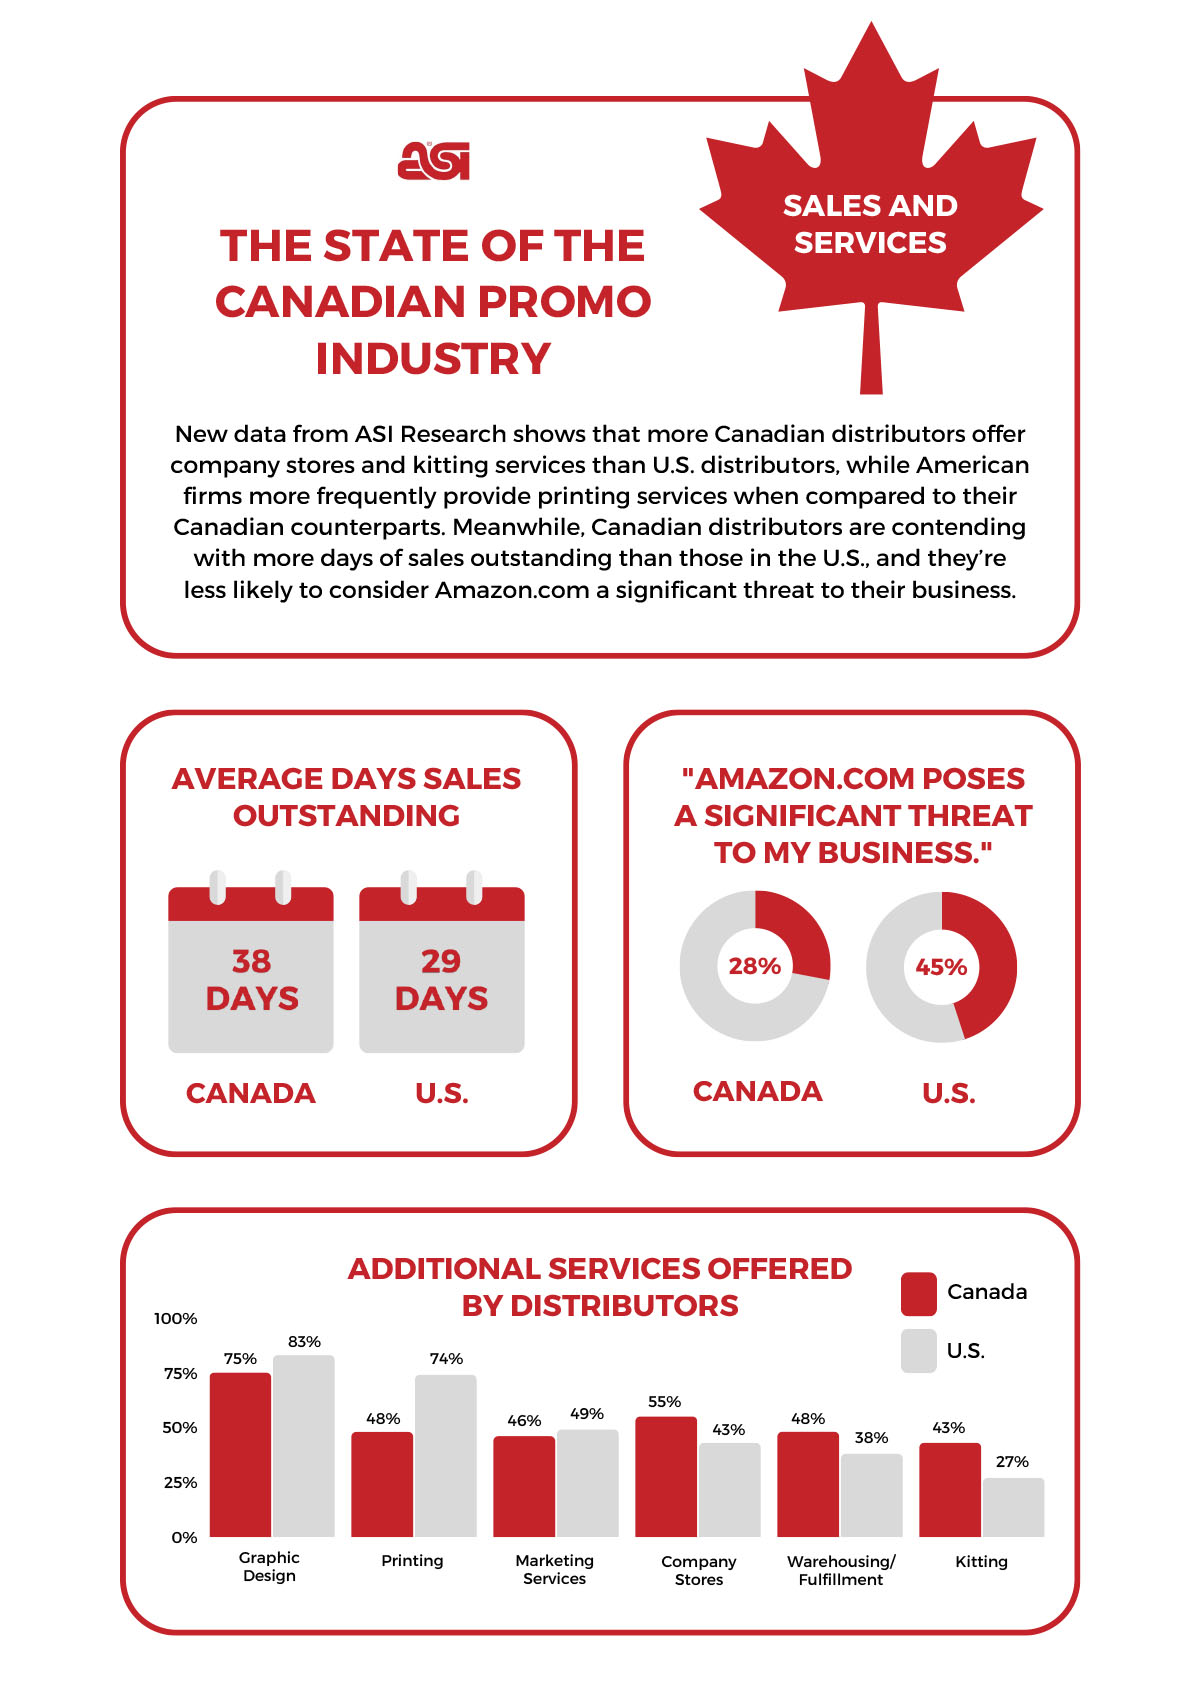 The State of the Canadian Promo Industry